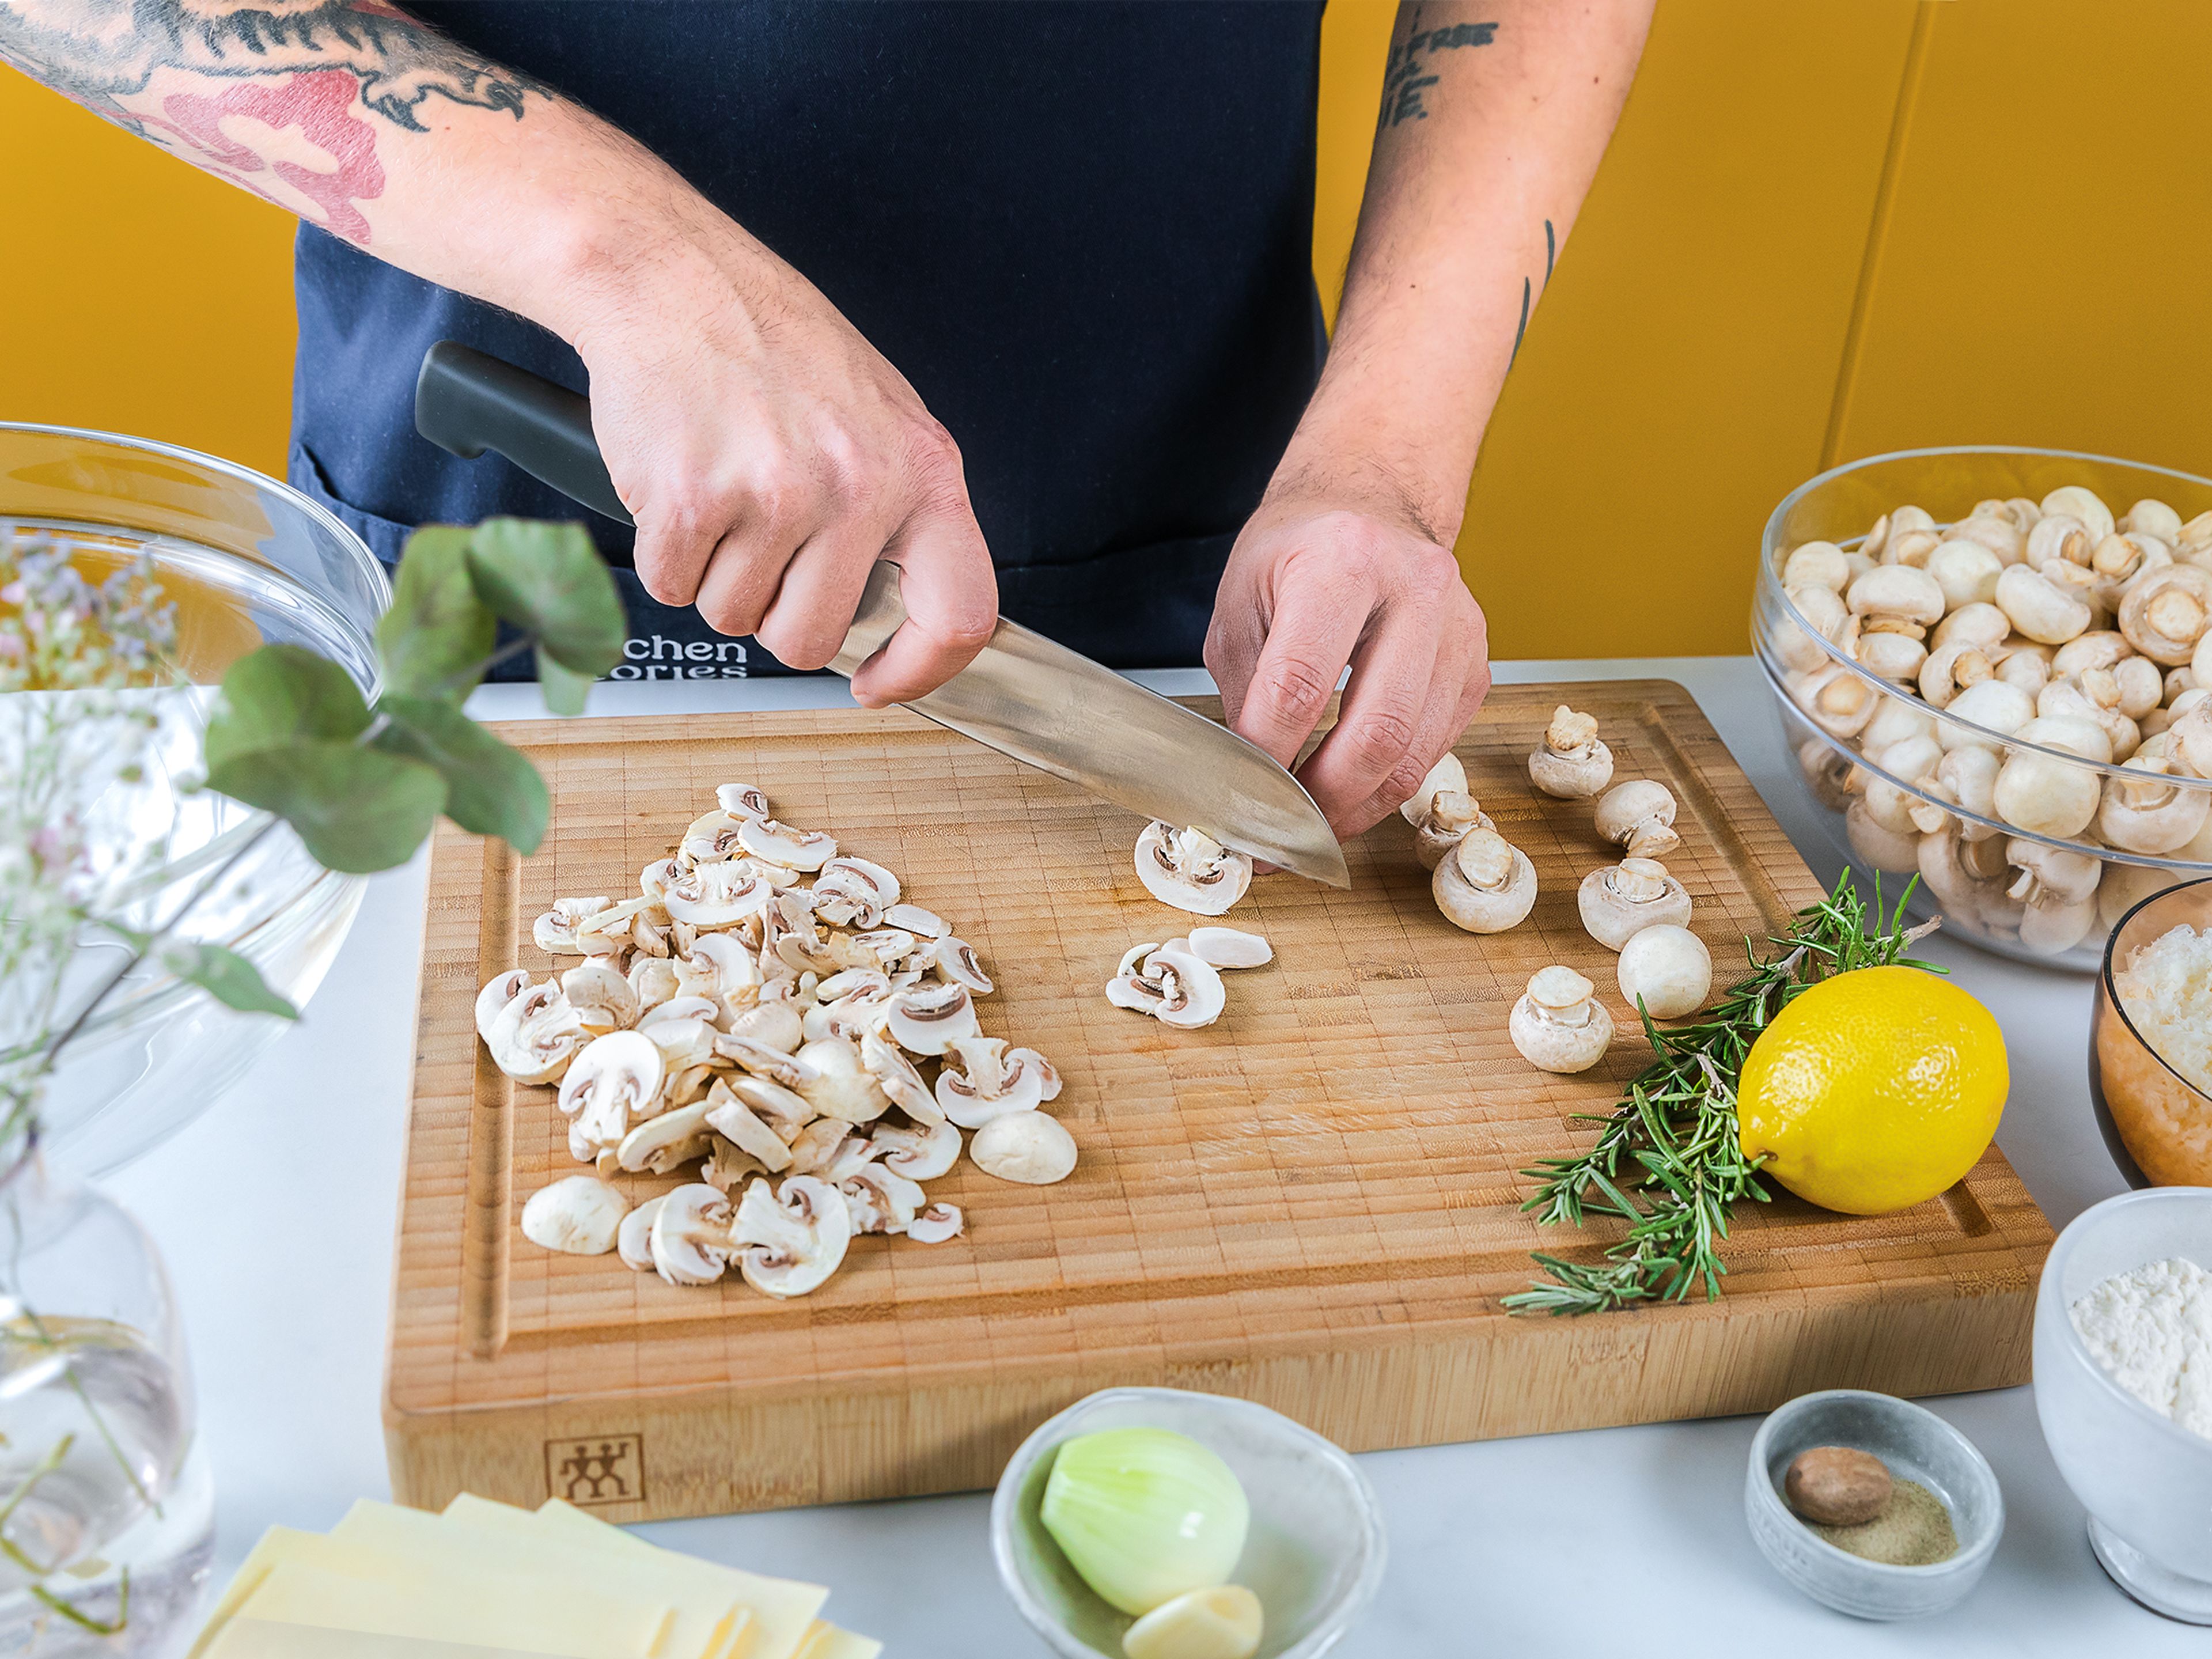 Clean and slice the mushrooms. Peel and chop garlic and onion. Pluck rosemary leaves from stems and finely chop.